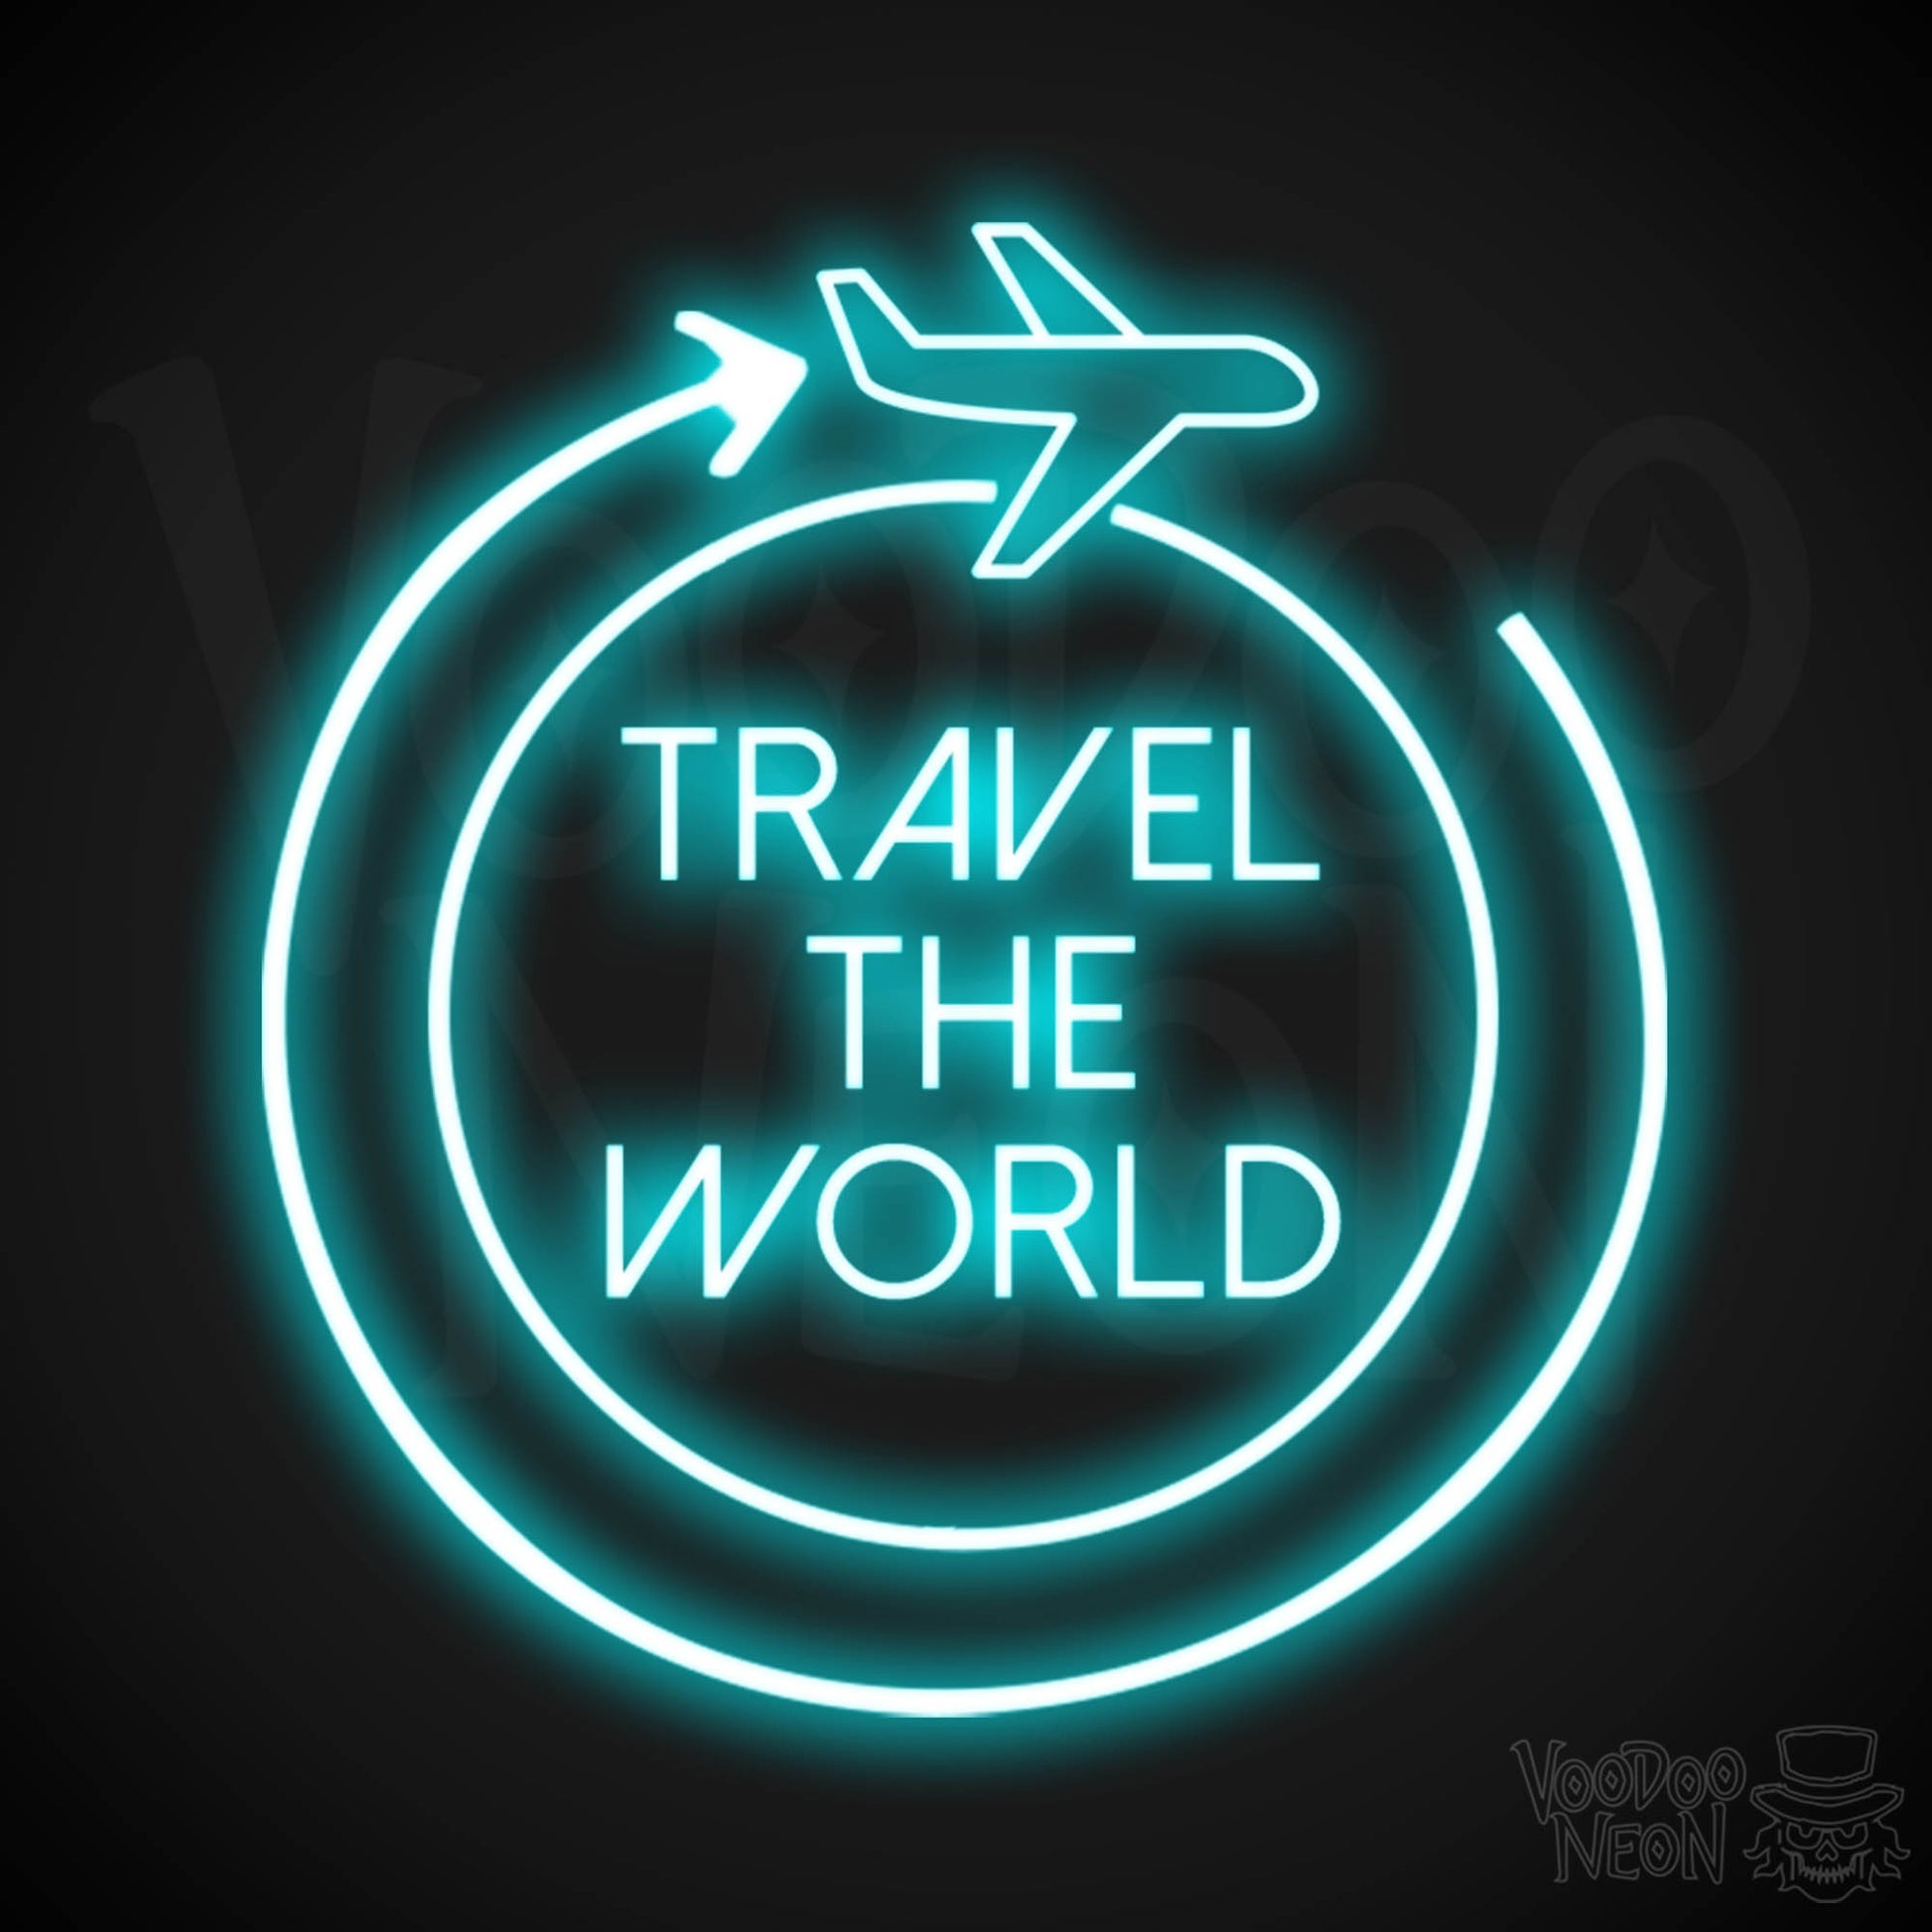 Let's Travel The World Neon Sign - LED Neon Wall Art - Color Ice Blue